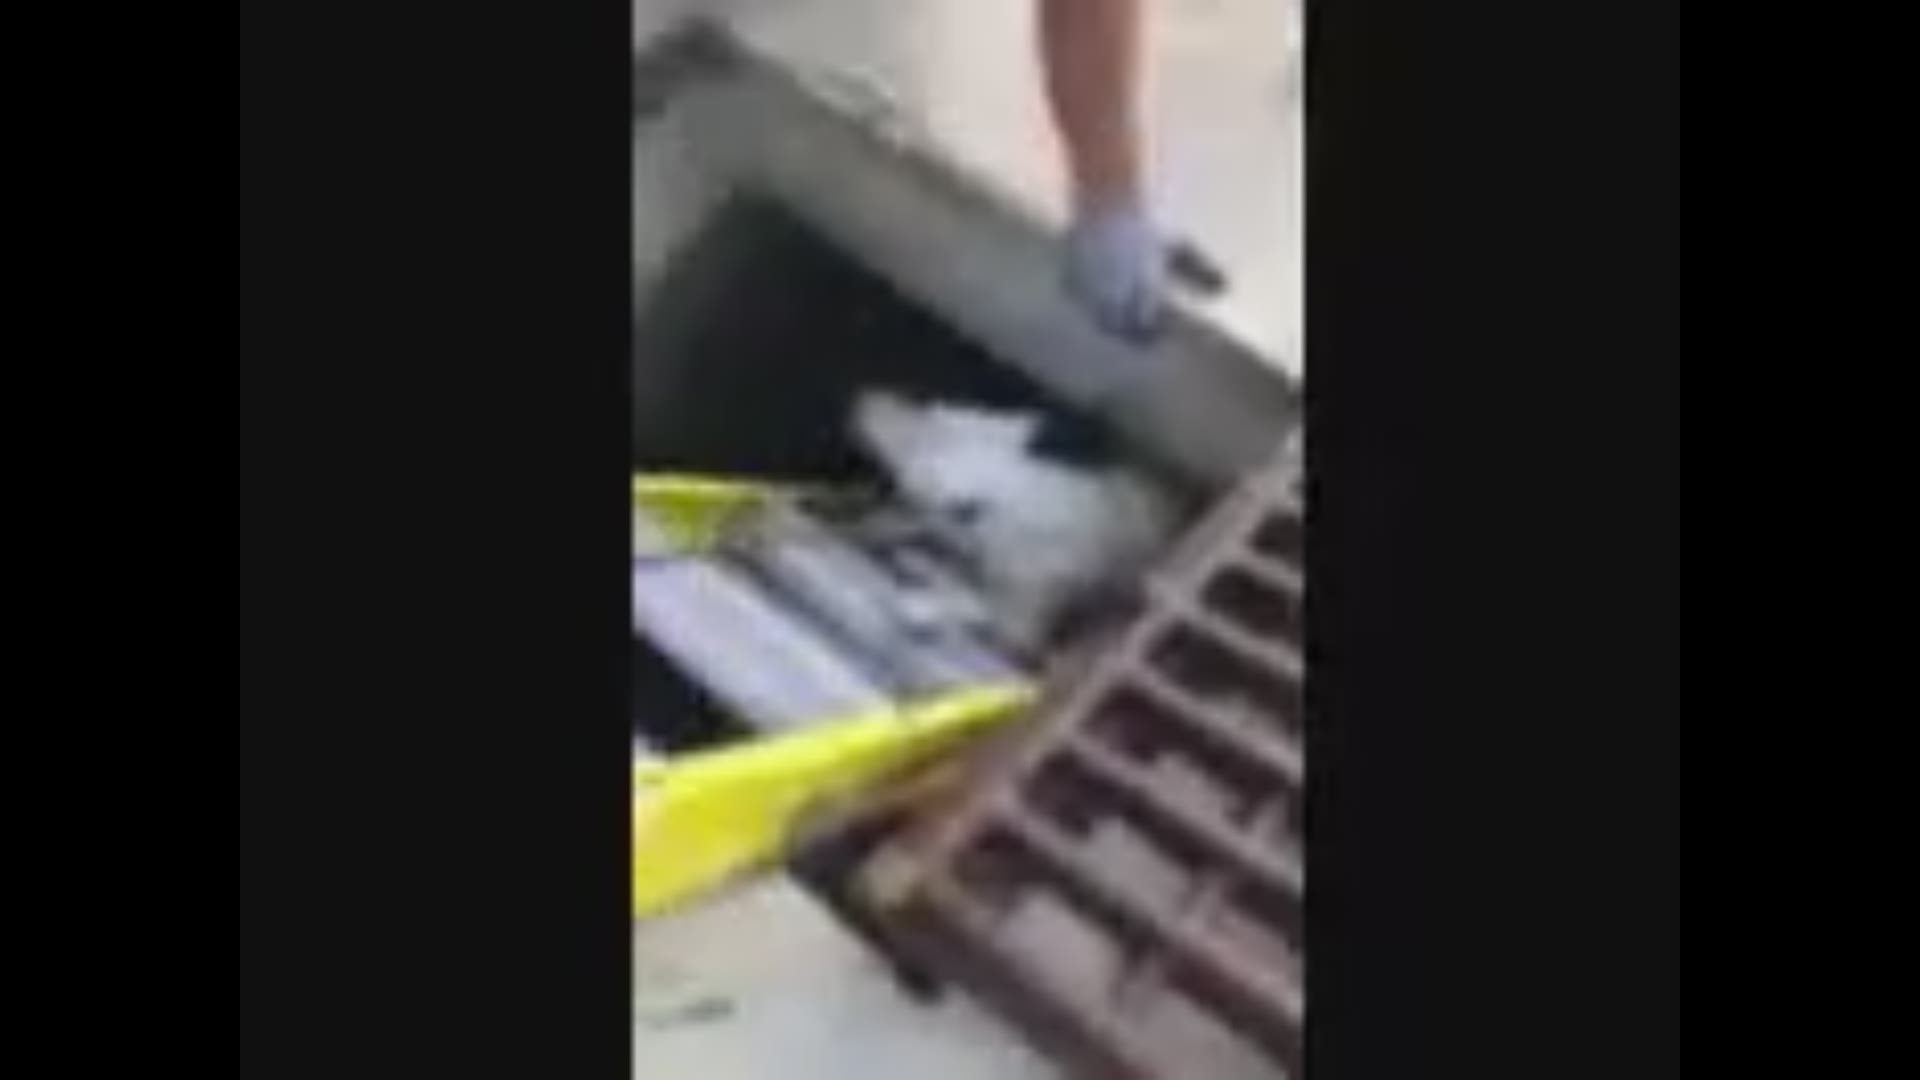 RAW VIDEO: Lost dog rescued from sewer drain in Jacksonville